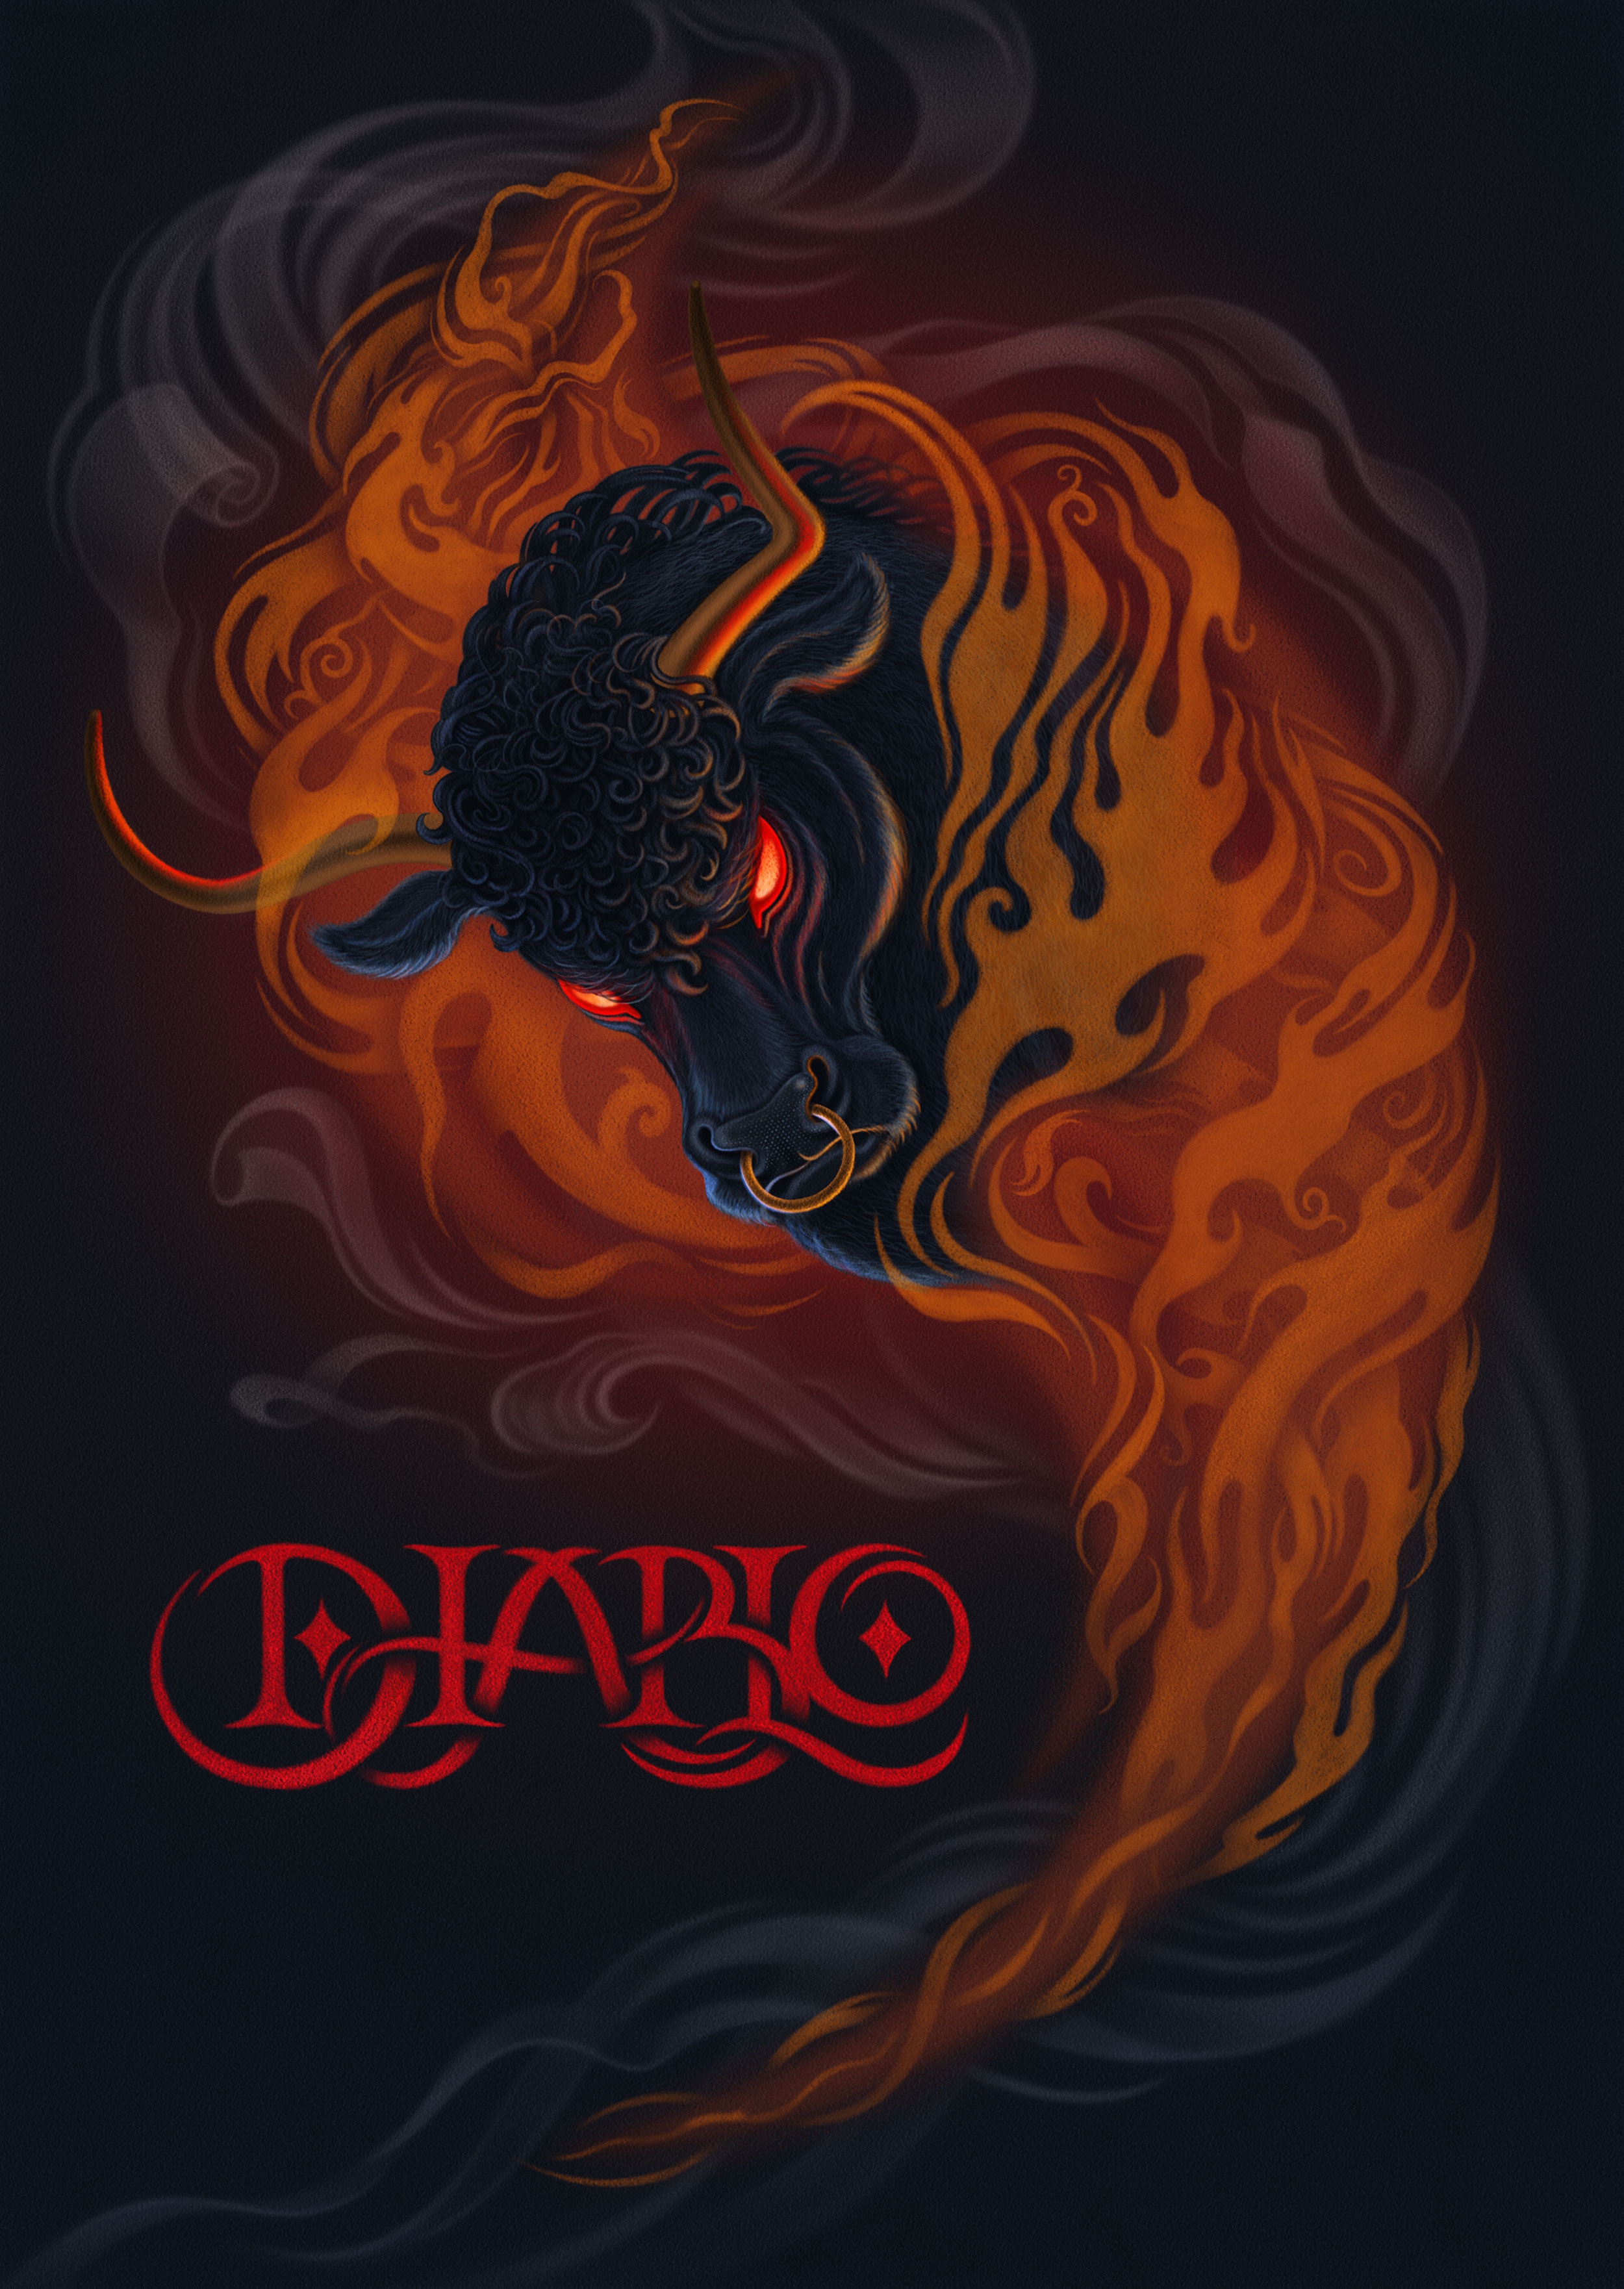 Diablo Concept Illustration of a really pissed-off bull